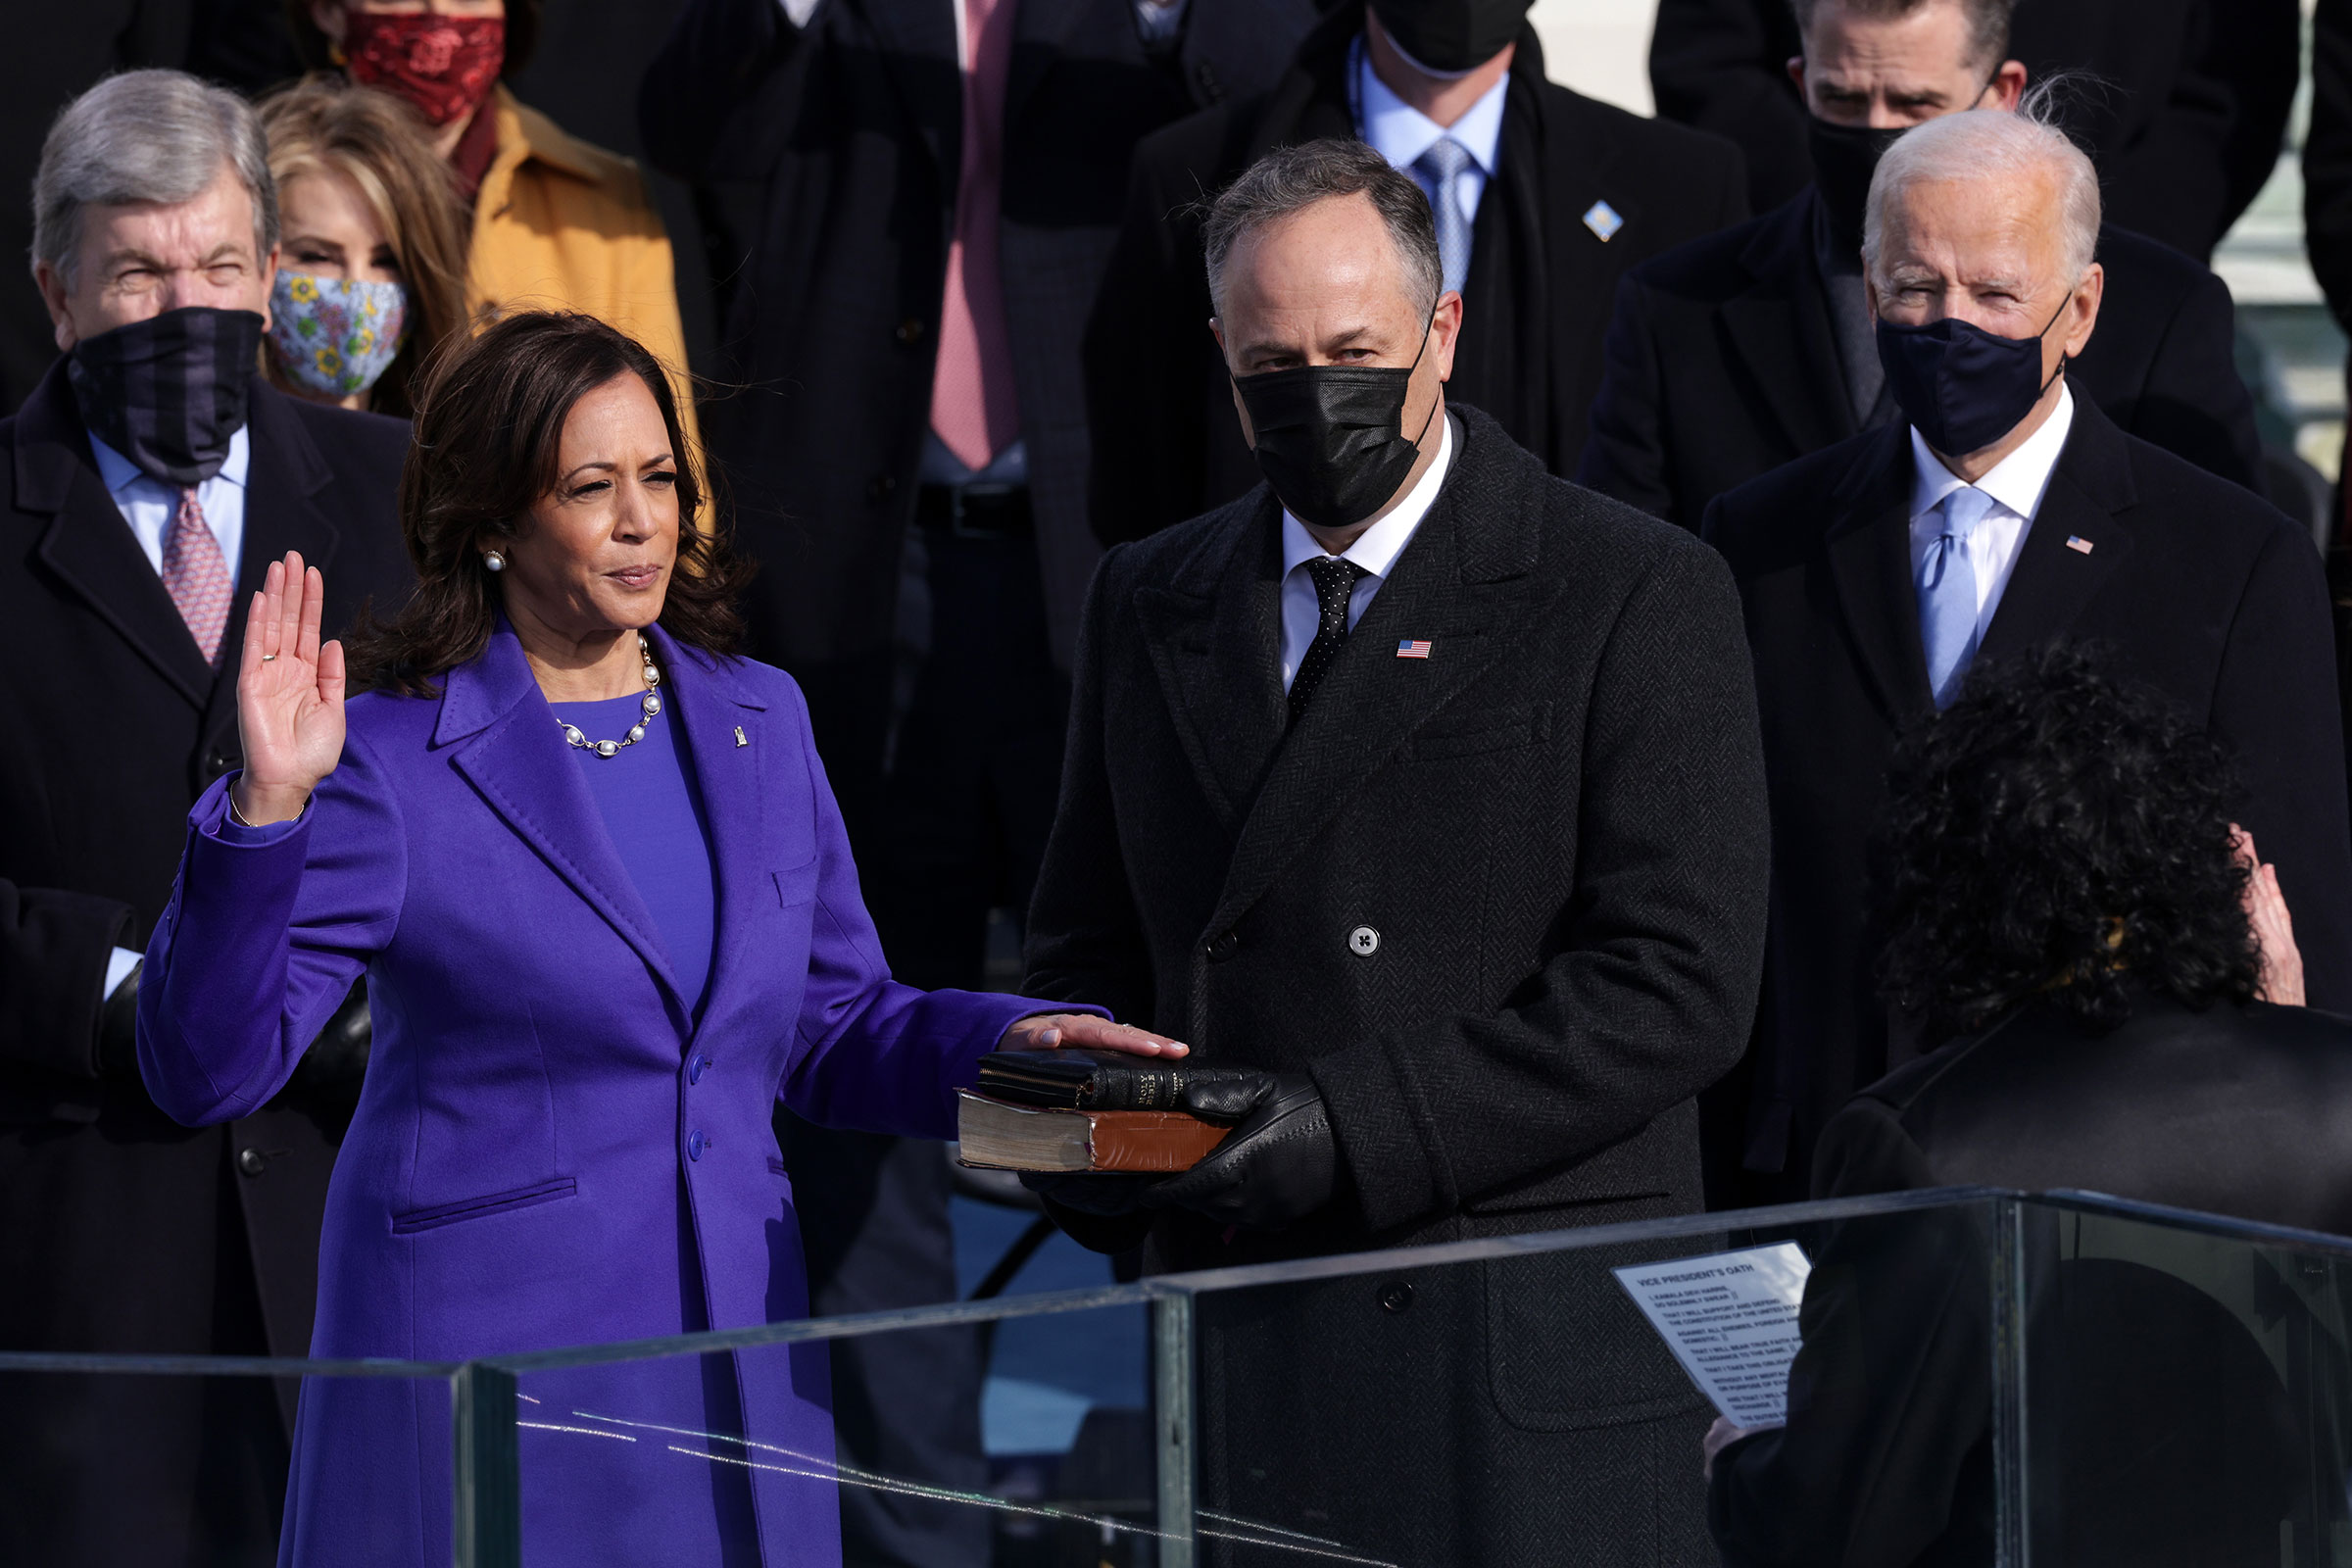 Kamala Harris is sworn in as Vice President of the United States as her husband Doug Emhoff looks on, in Washington on Jan. 20, 2021.